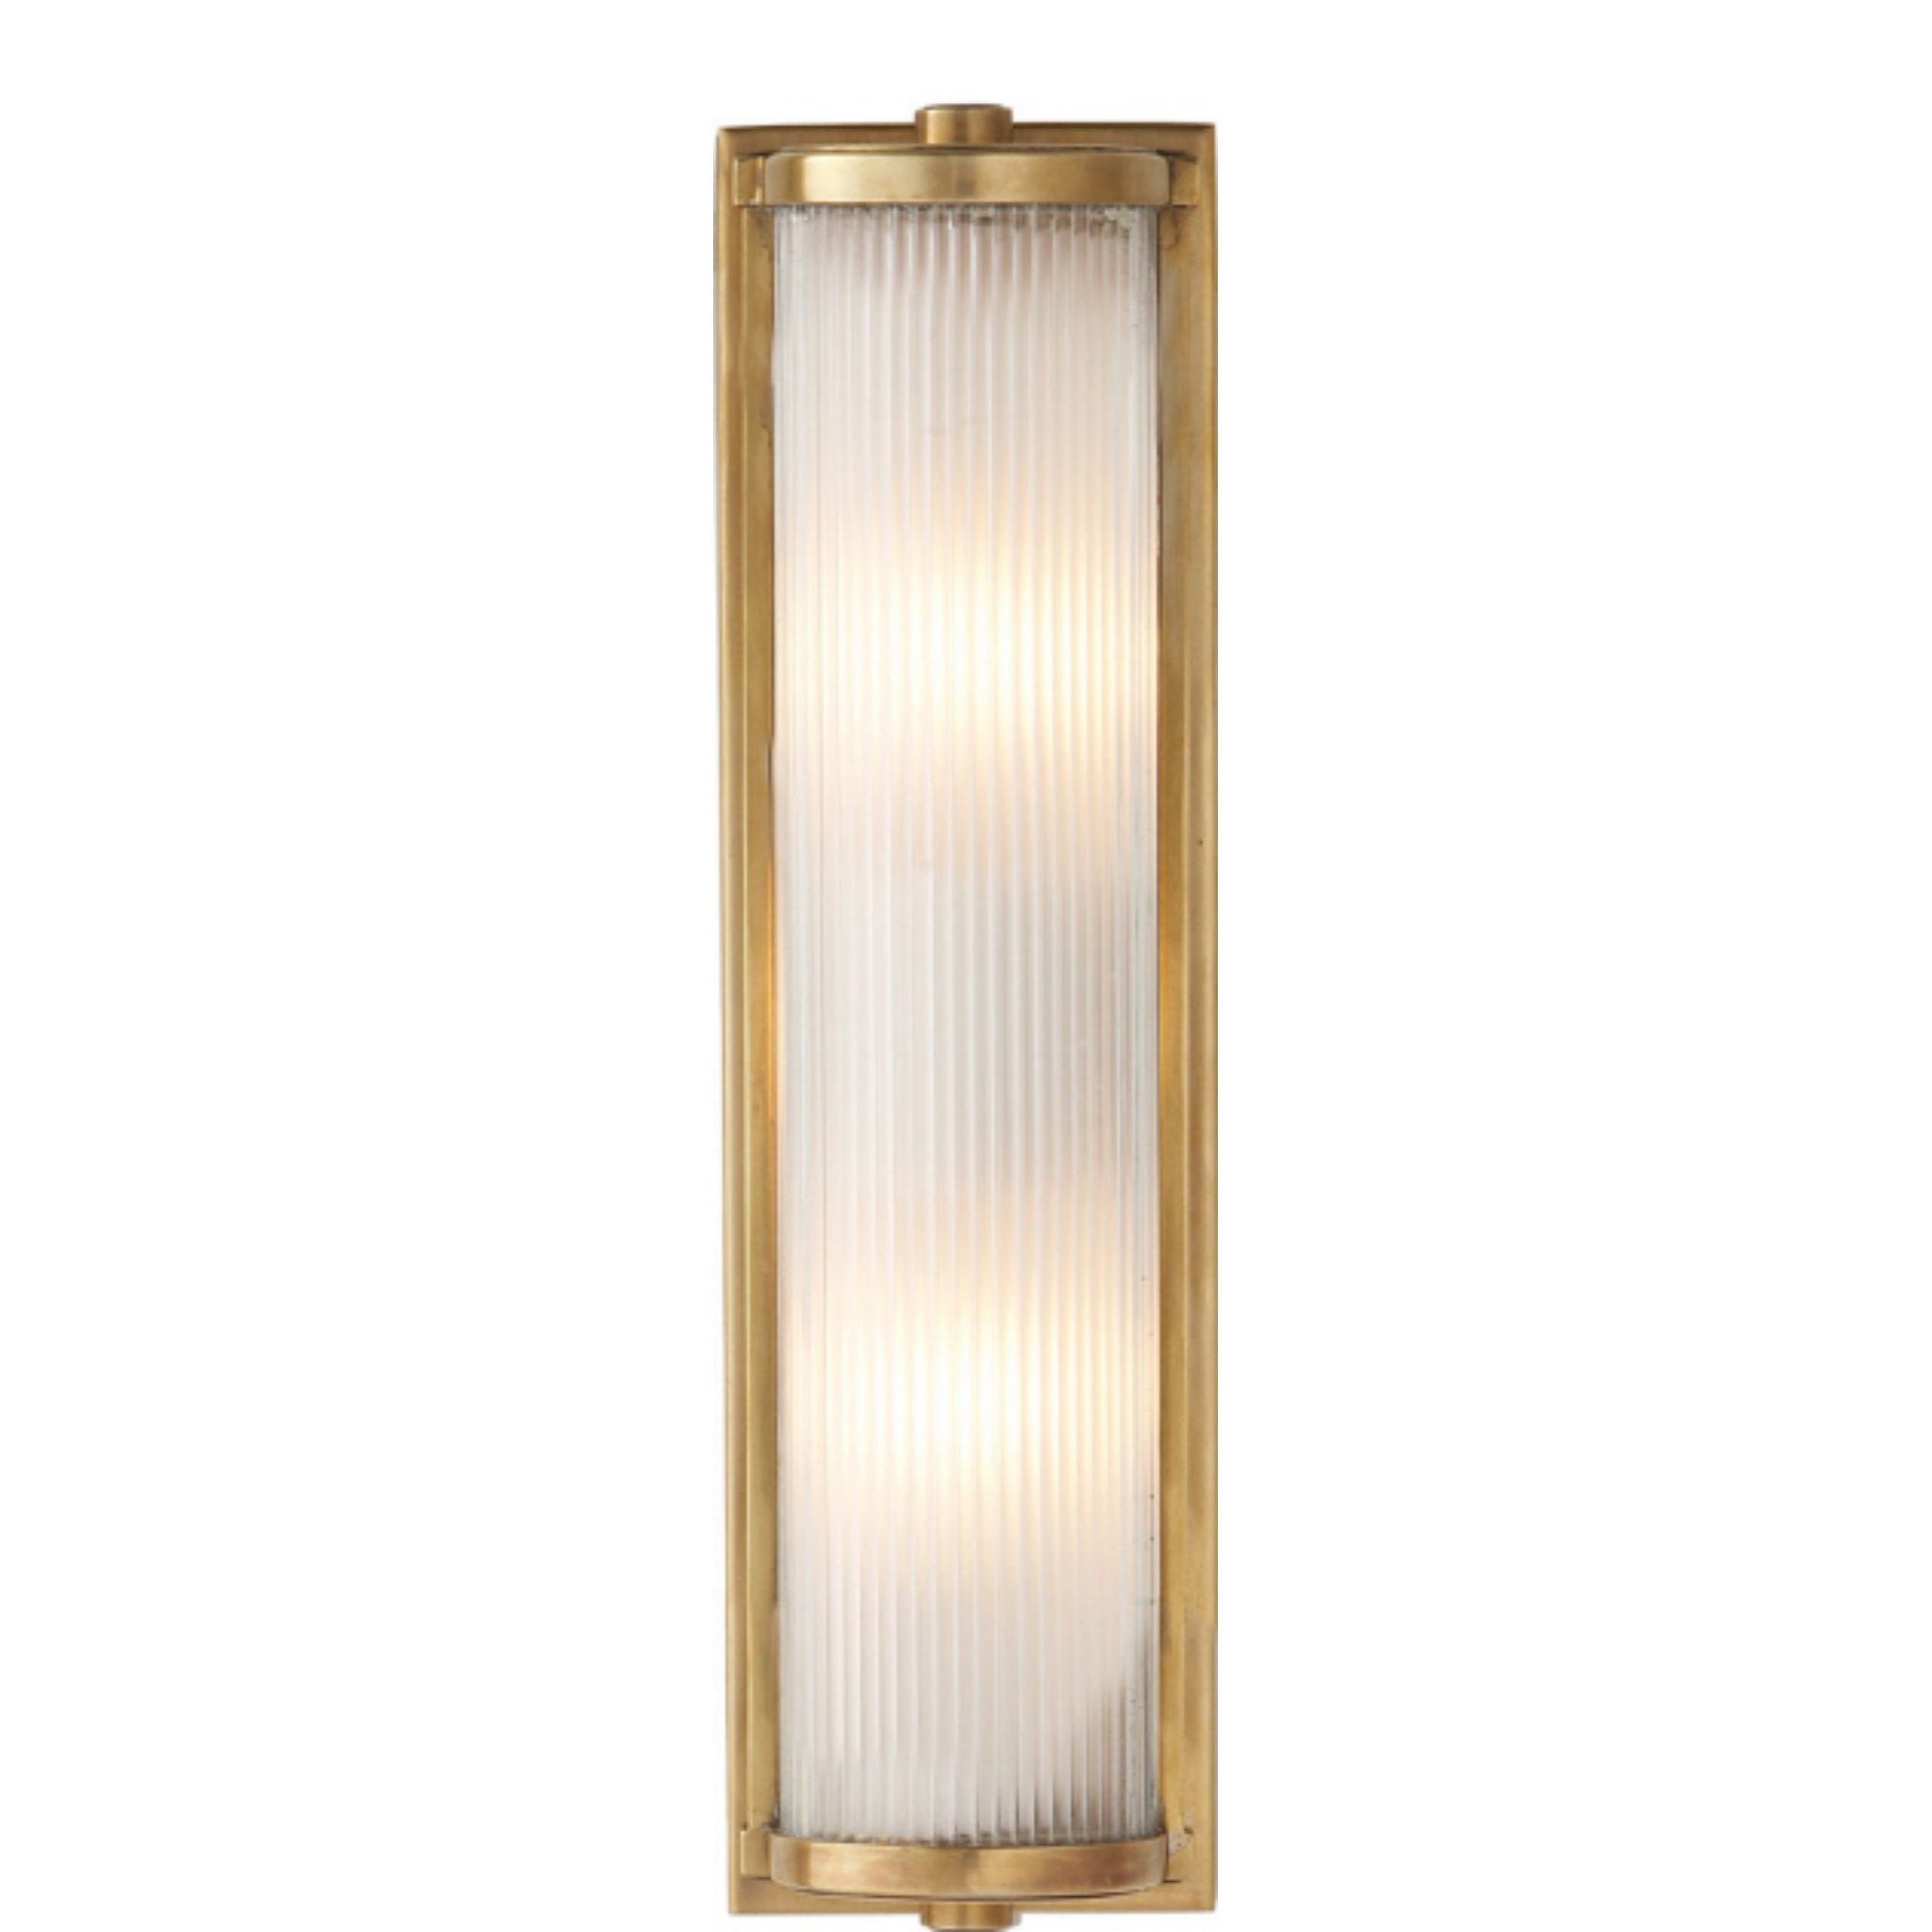 Thomas O'Brien Dresser Long Glass Rod Light in Hand-Rubbed Antique Brass with Frosted Glass Liner